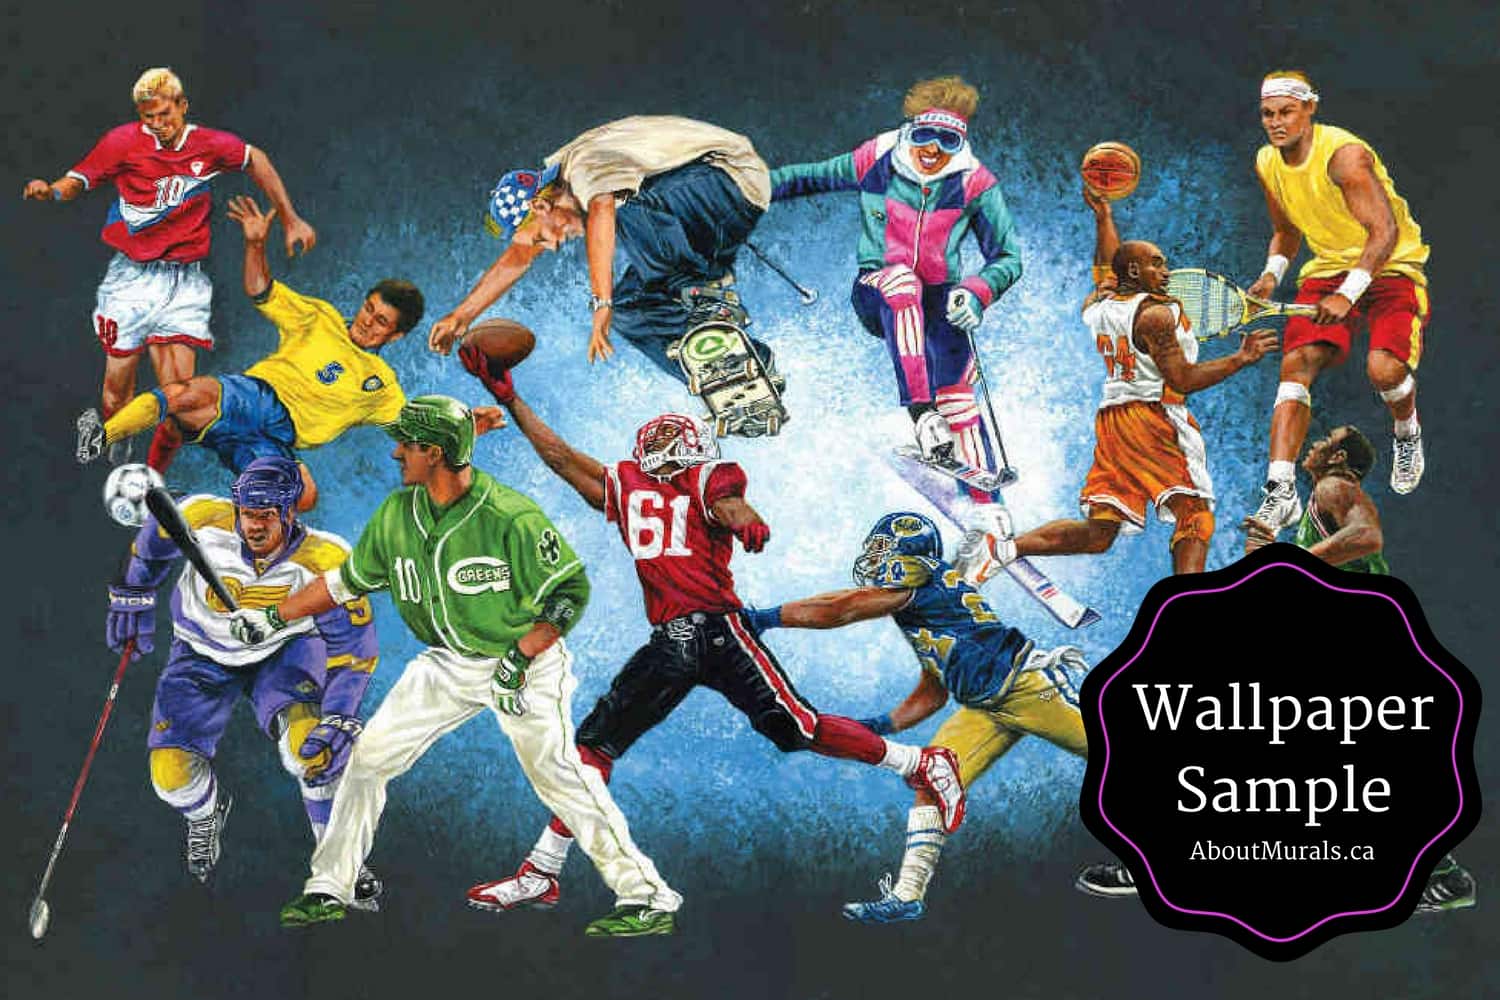 Digital Wallpaper Mural for sports enthusiasts